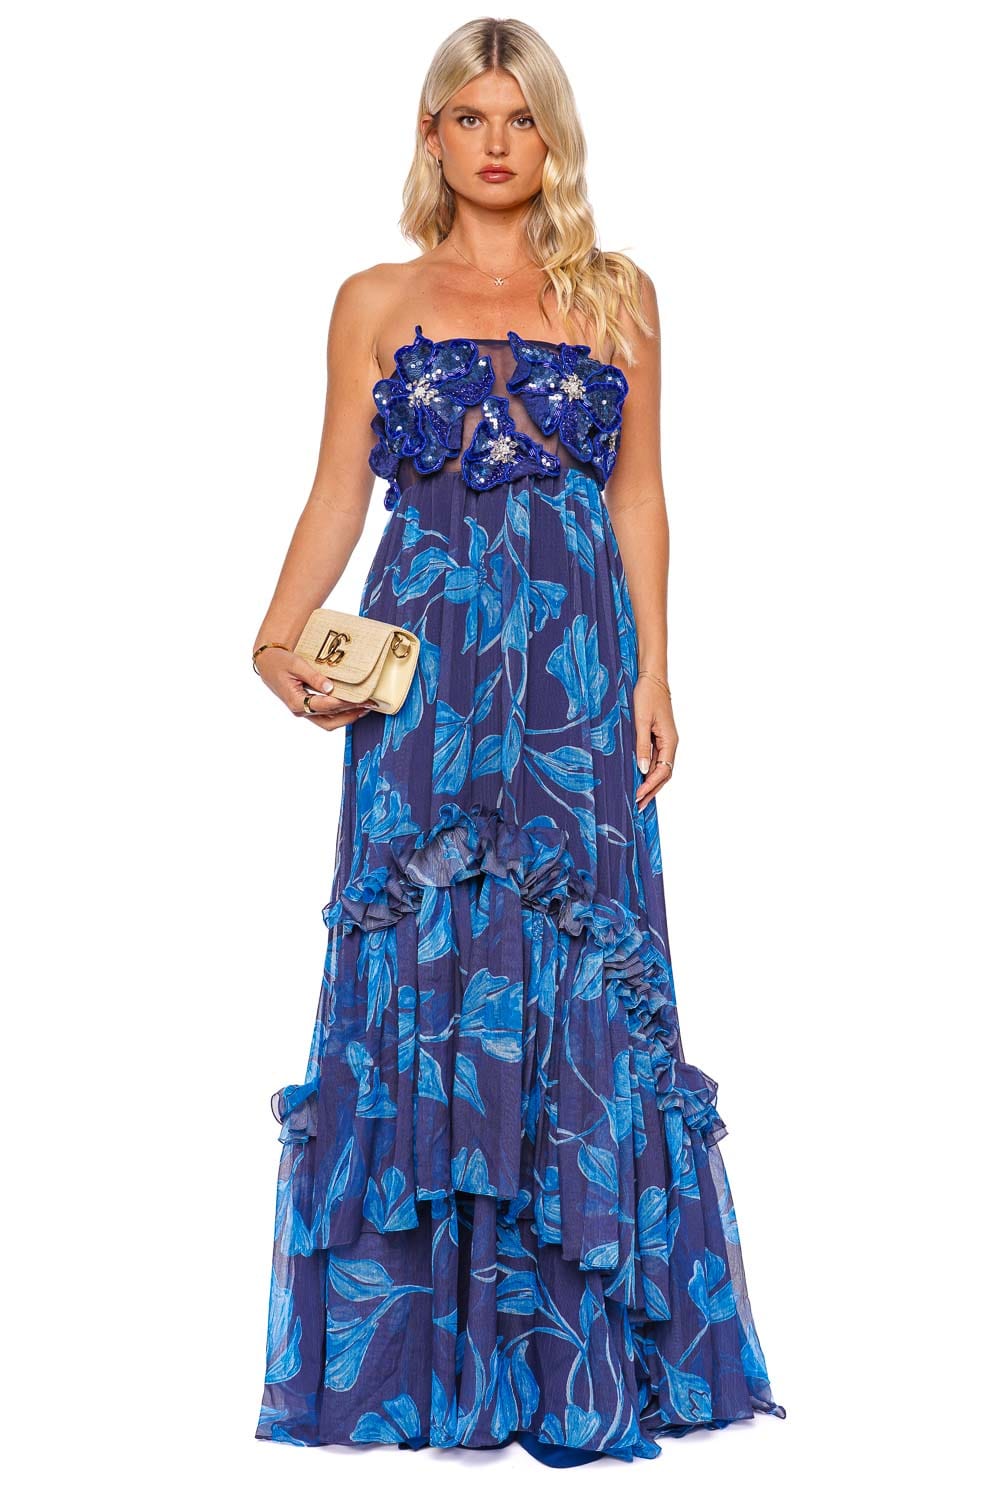 PatBO Nightflower Beaded Strapless Gown